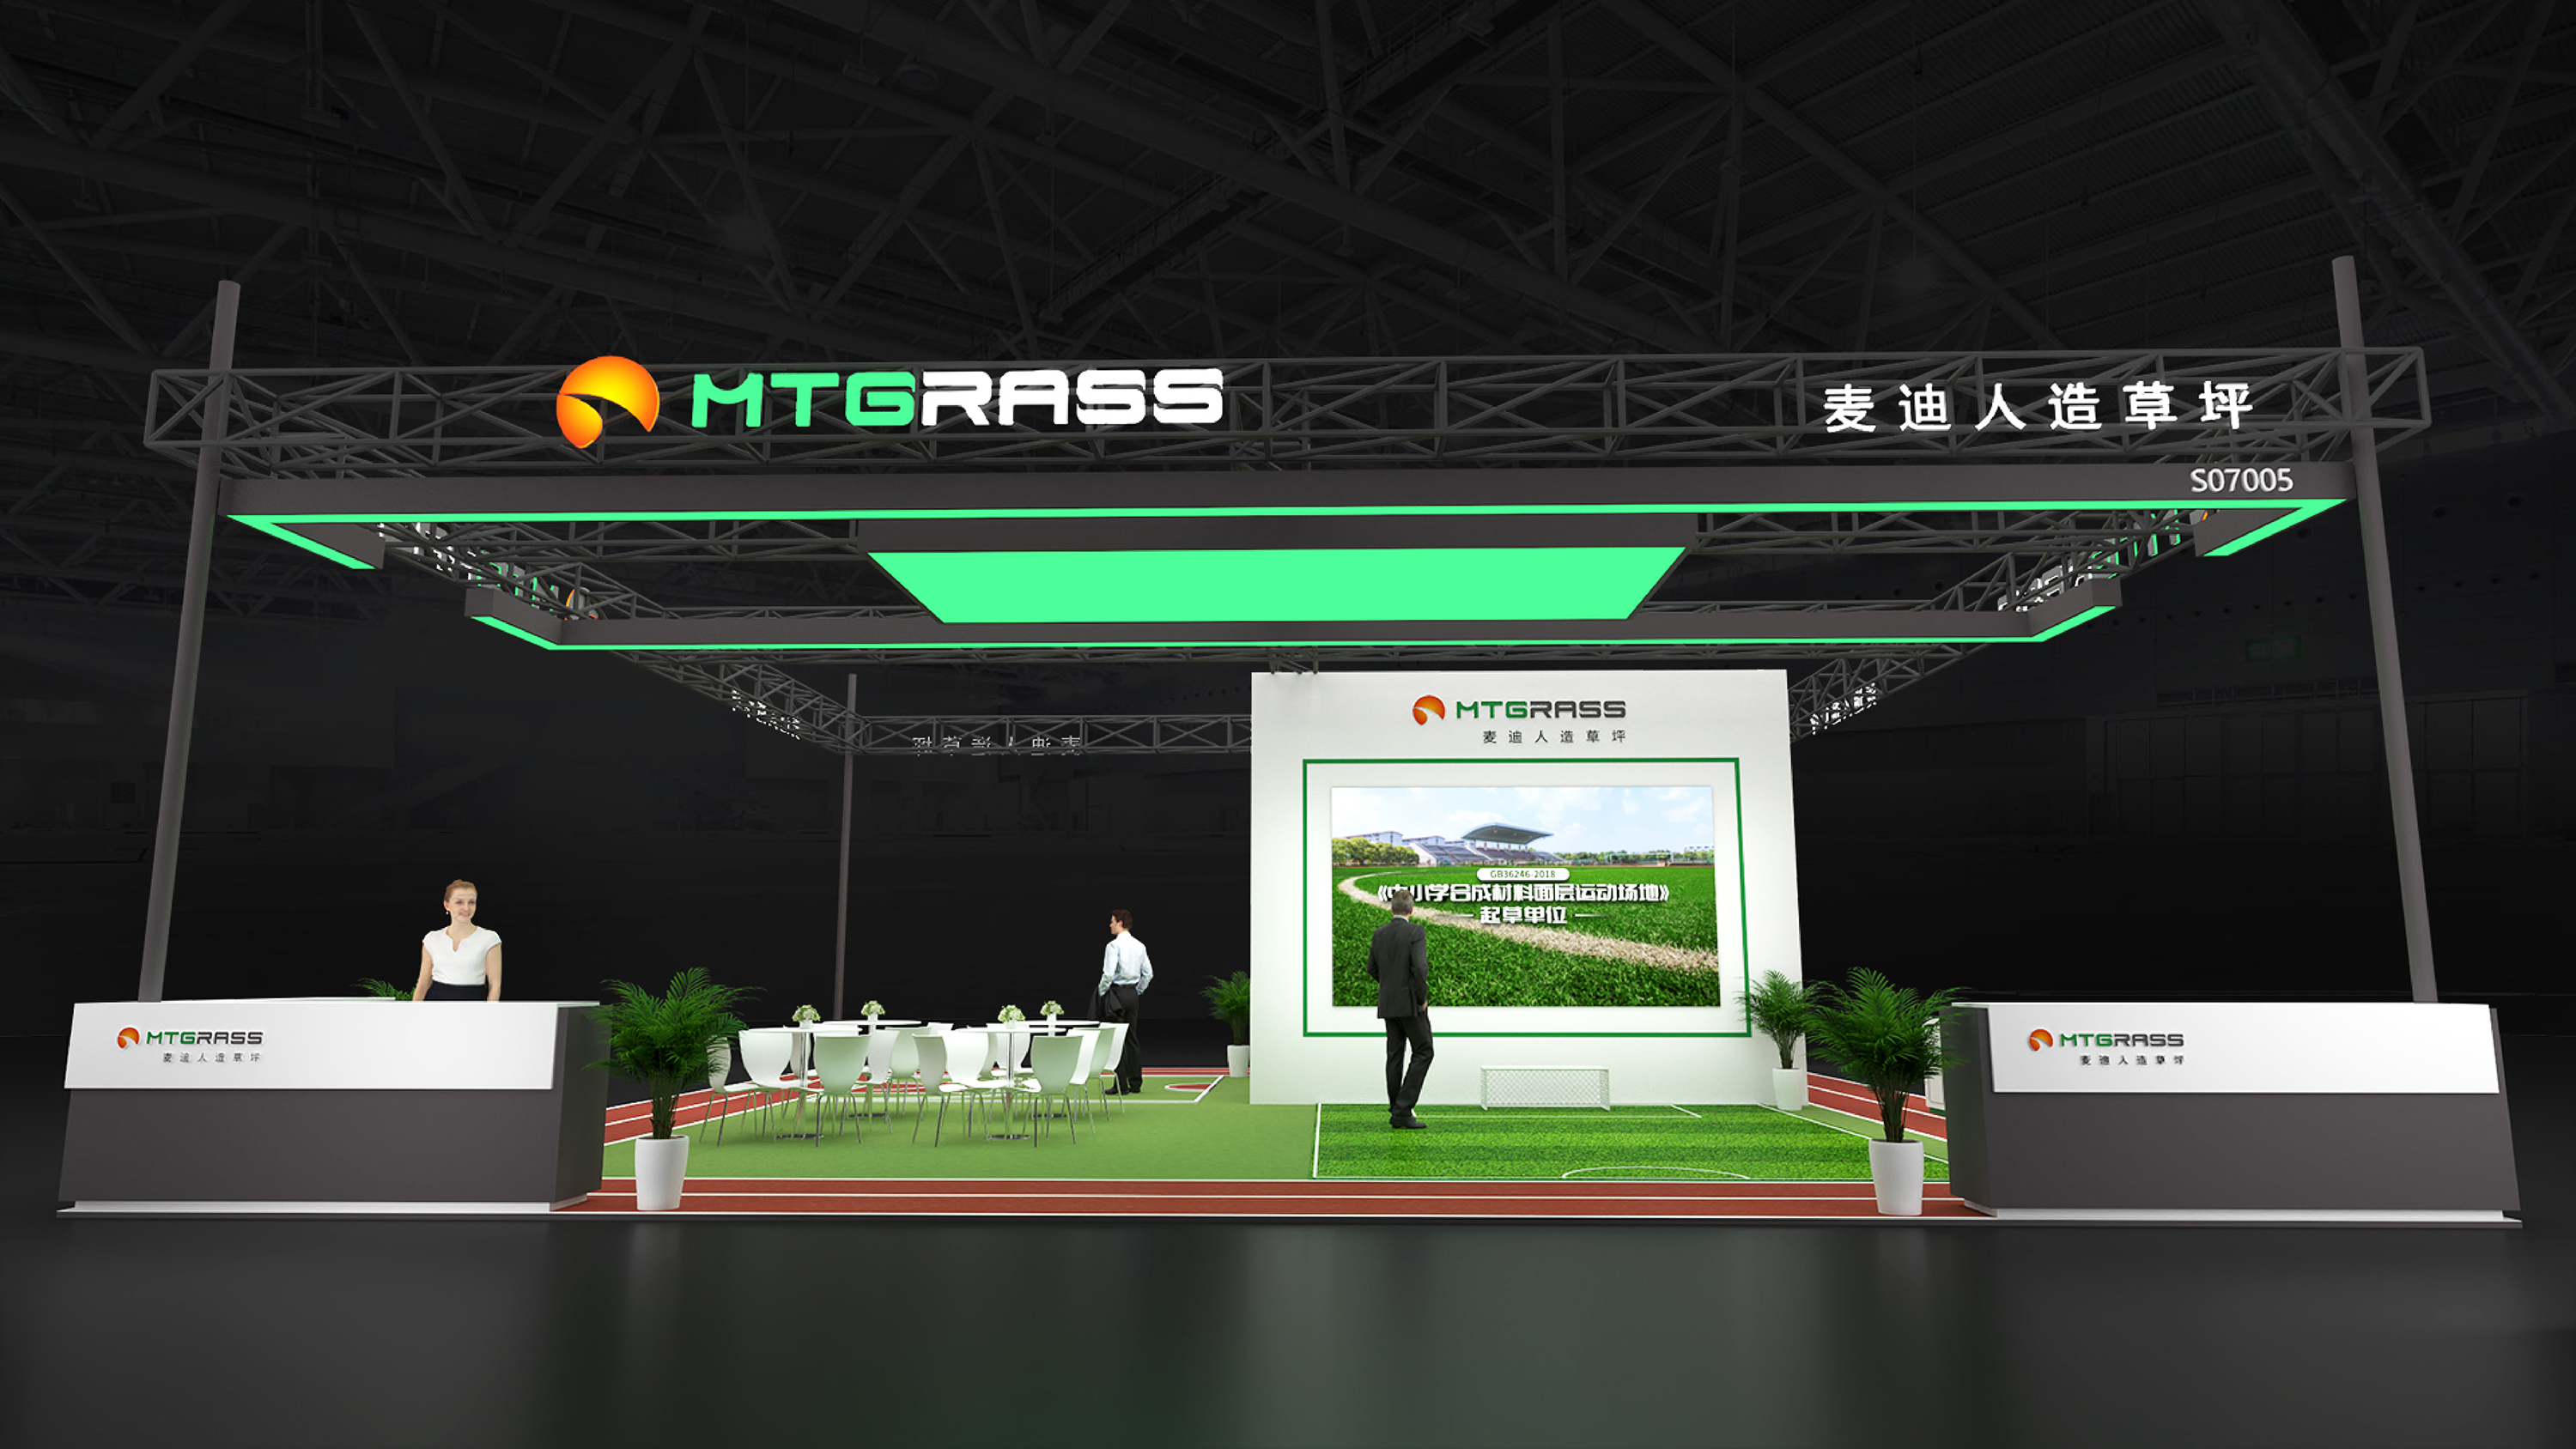 Mighty Grass warmly invites you to visit us at the 82th China Educational Equipment Exhibition.